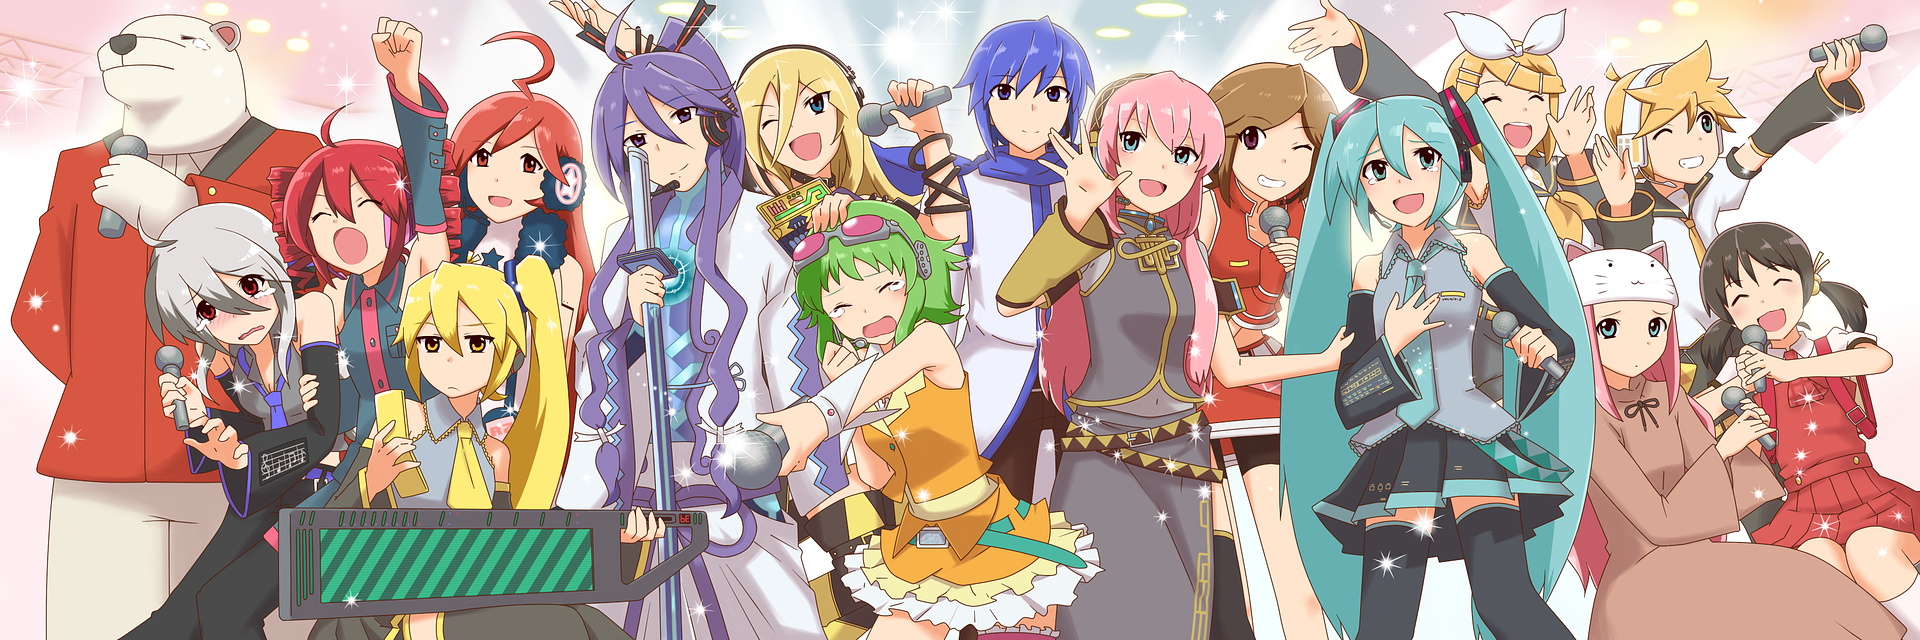 Vocaloid And Utau Rp Group banner